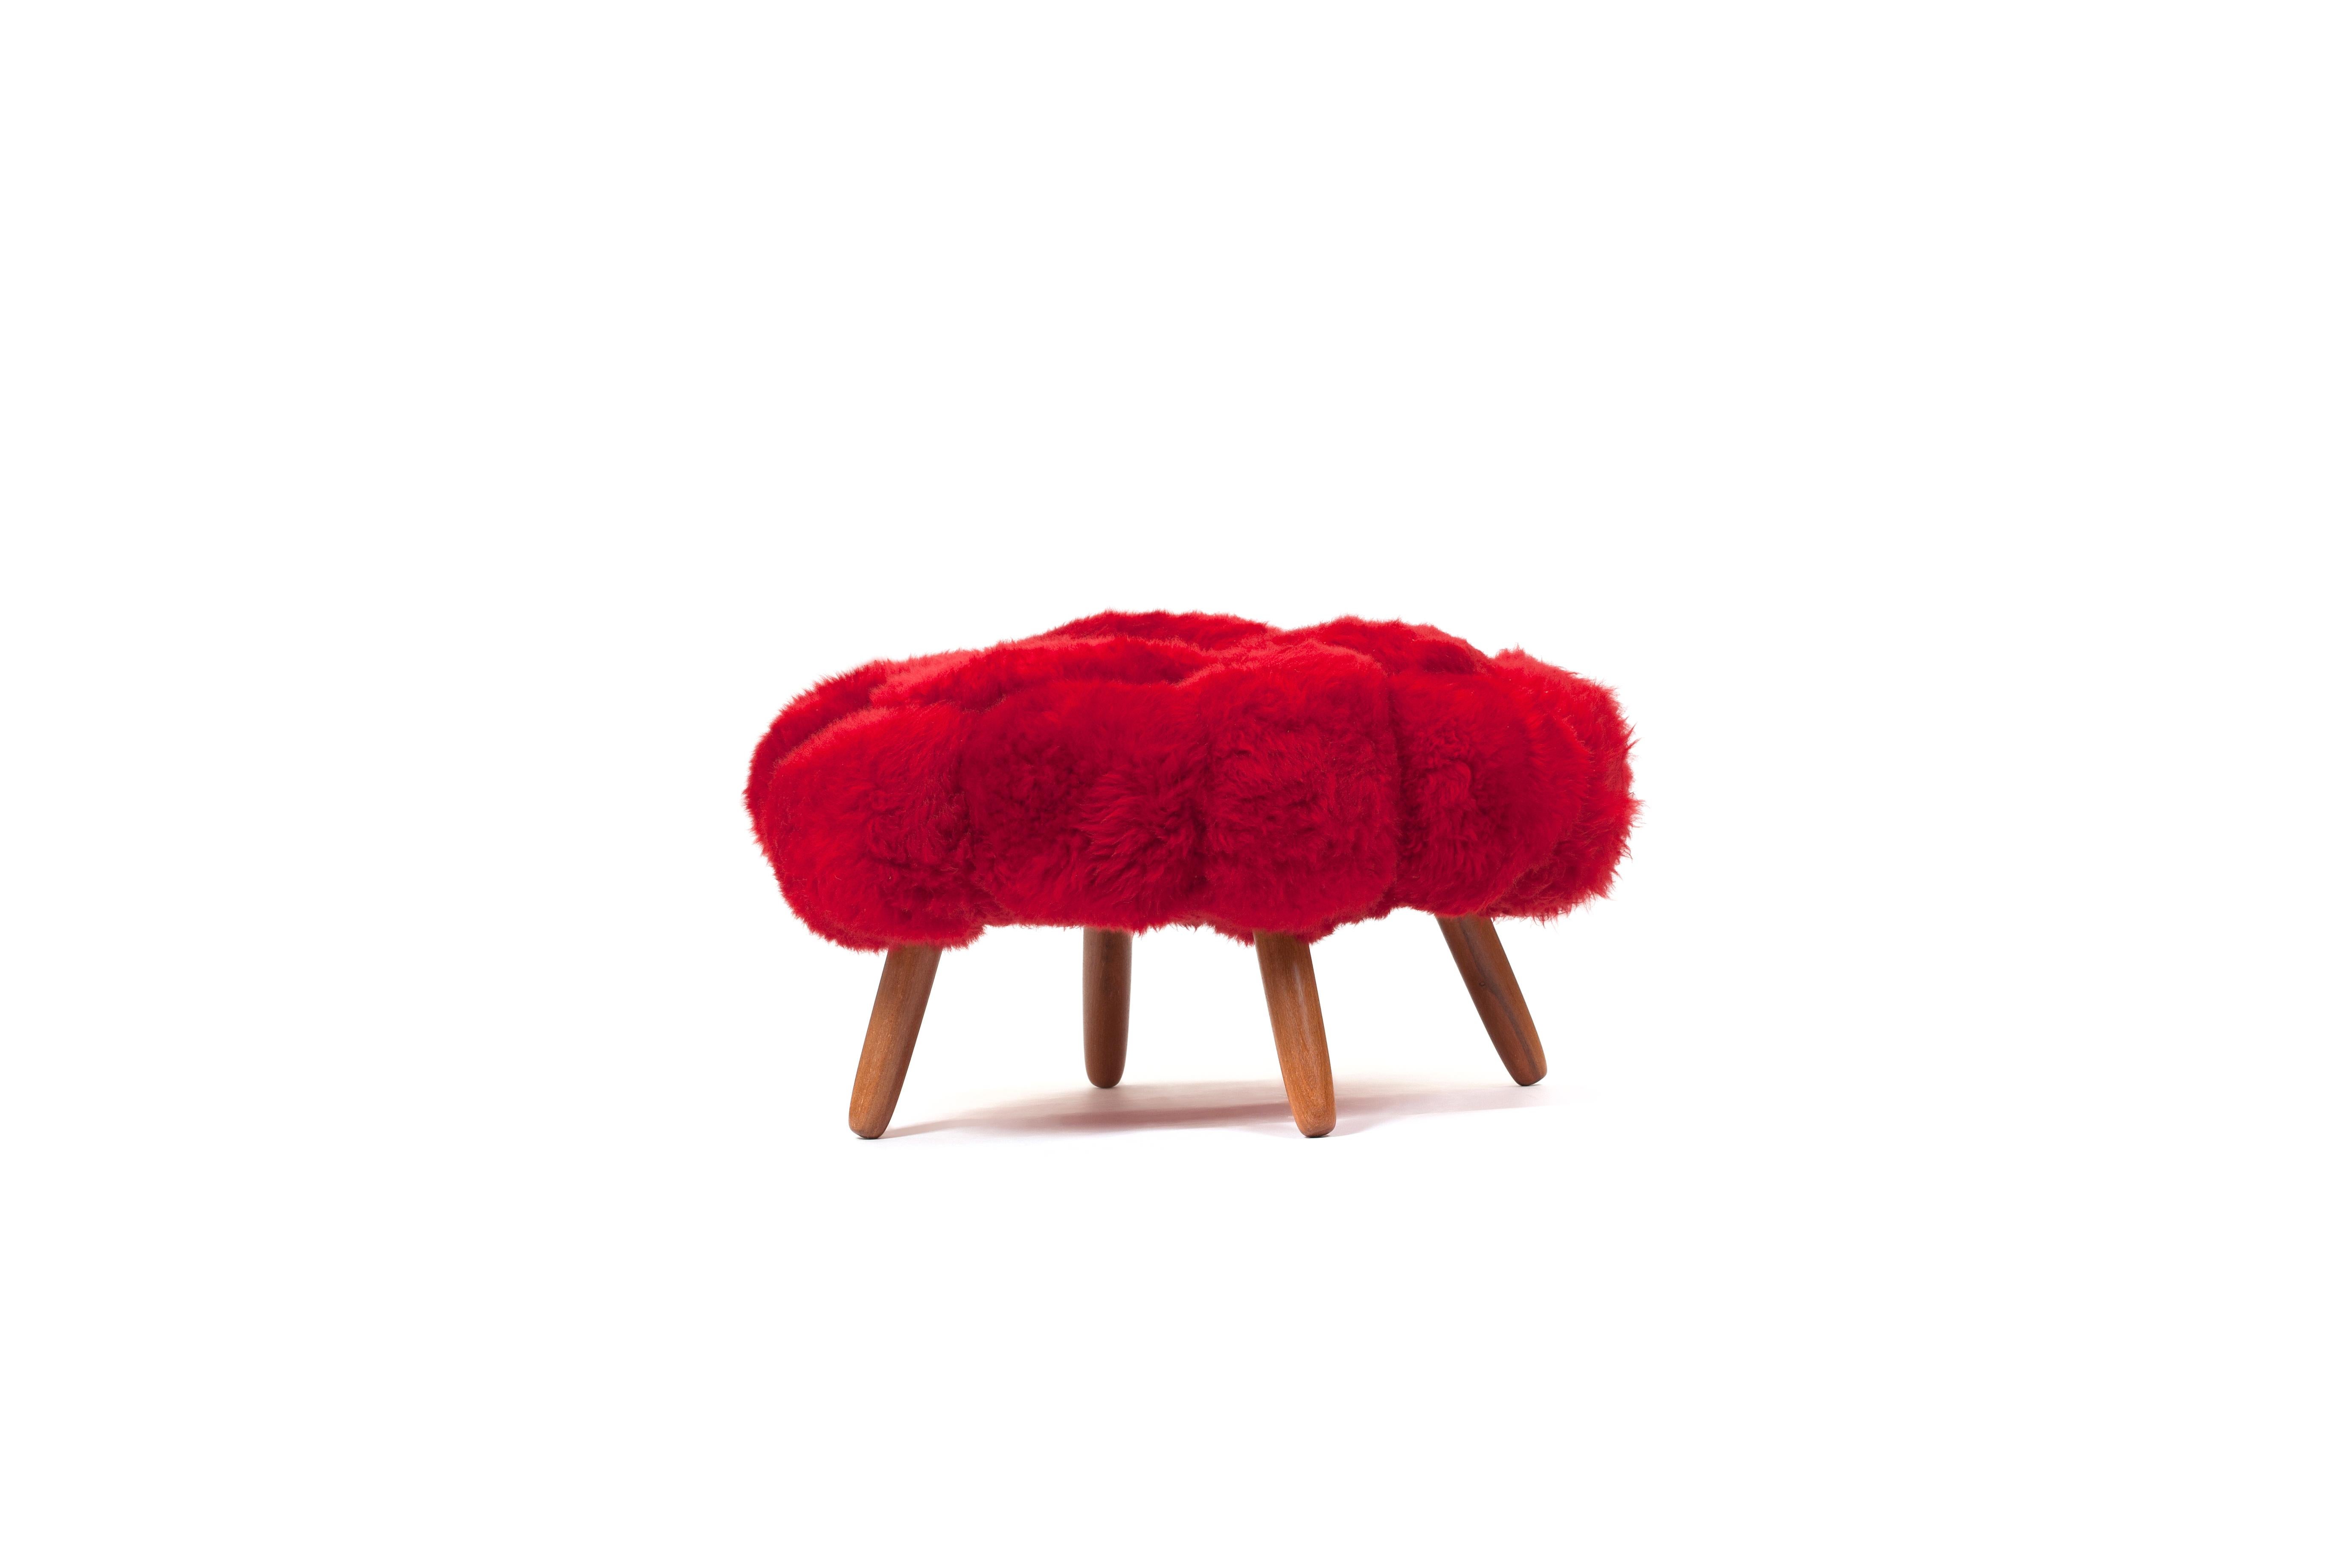 Fernando and Humberto Campana [Brazilian, b. 1961,1953]
Bolotas Puff (Red), 2018
Sheep's wool and Ipê wood
19.75 x 35.5 x 35.5 inches
50 x 90 x 90 cm
Edition of 8

Introduced during the Campana brothers’ 2015 exhibition, Artisanal, at Friedman